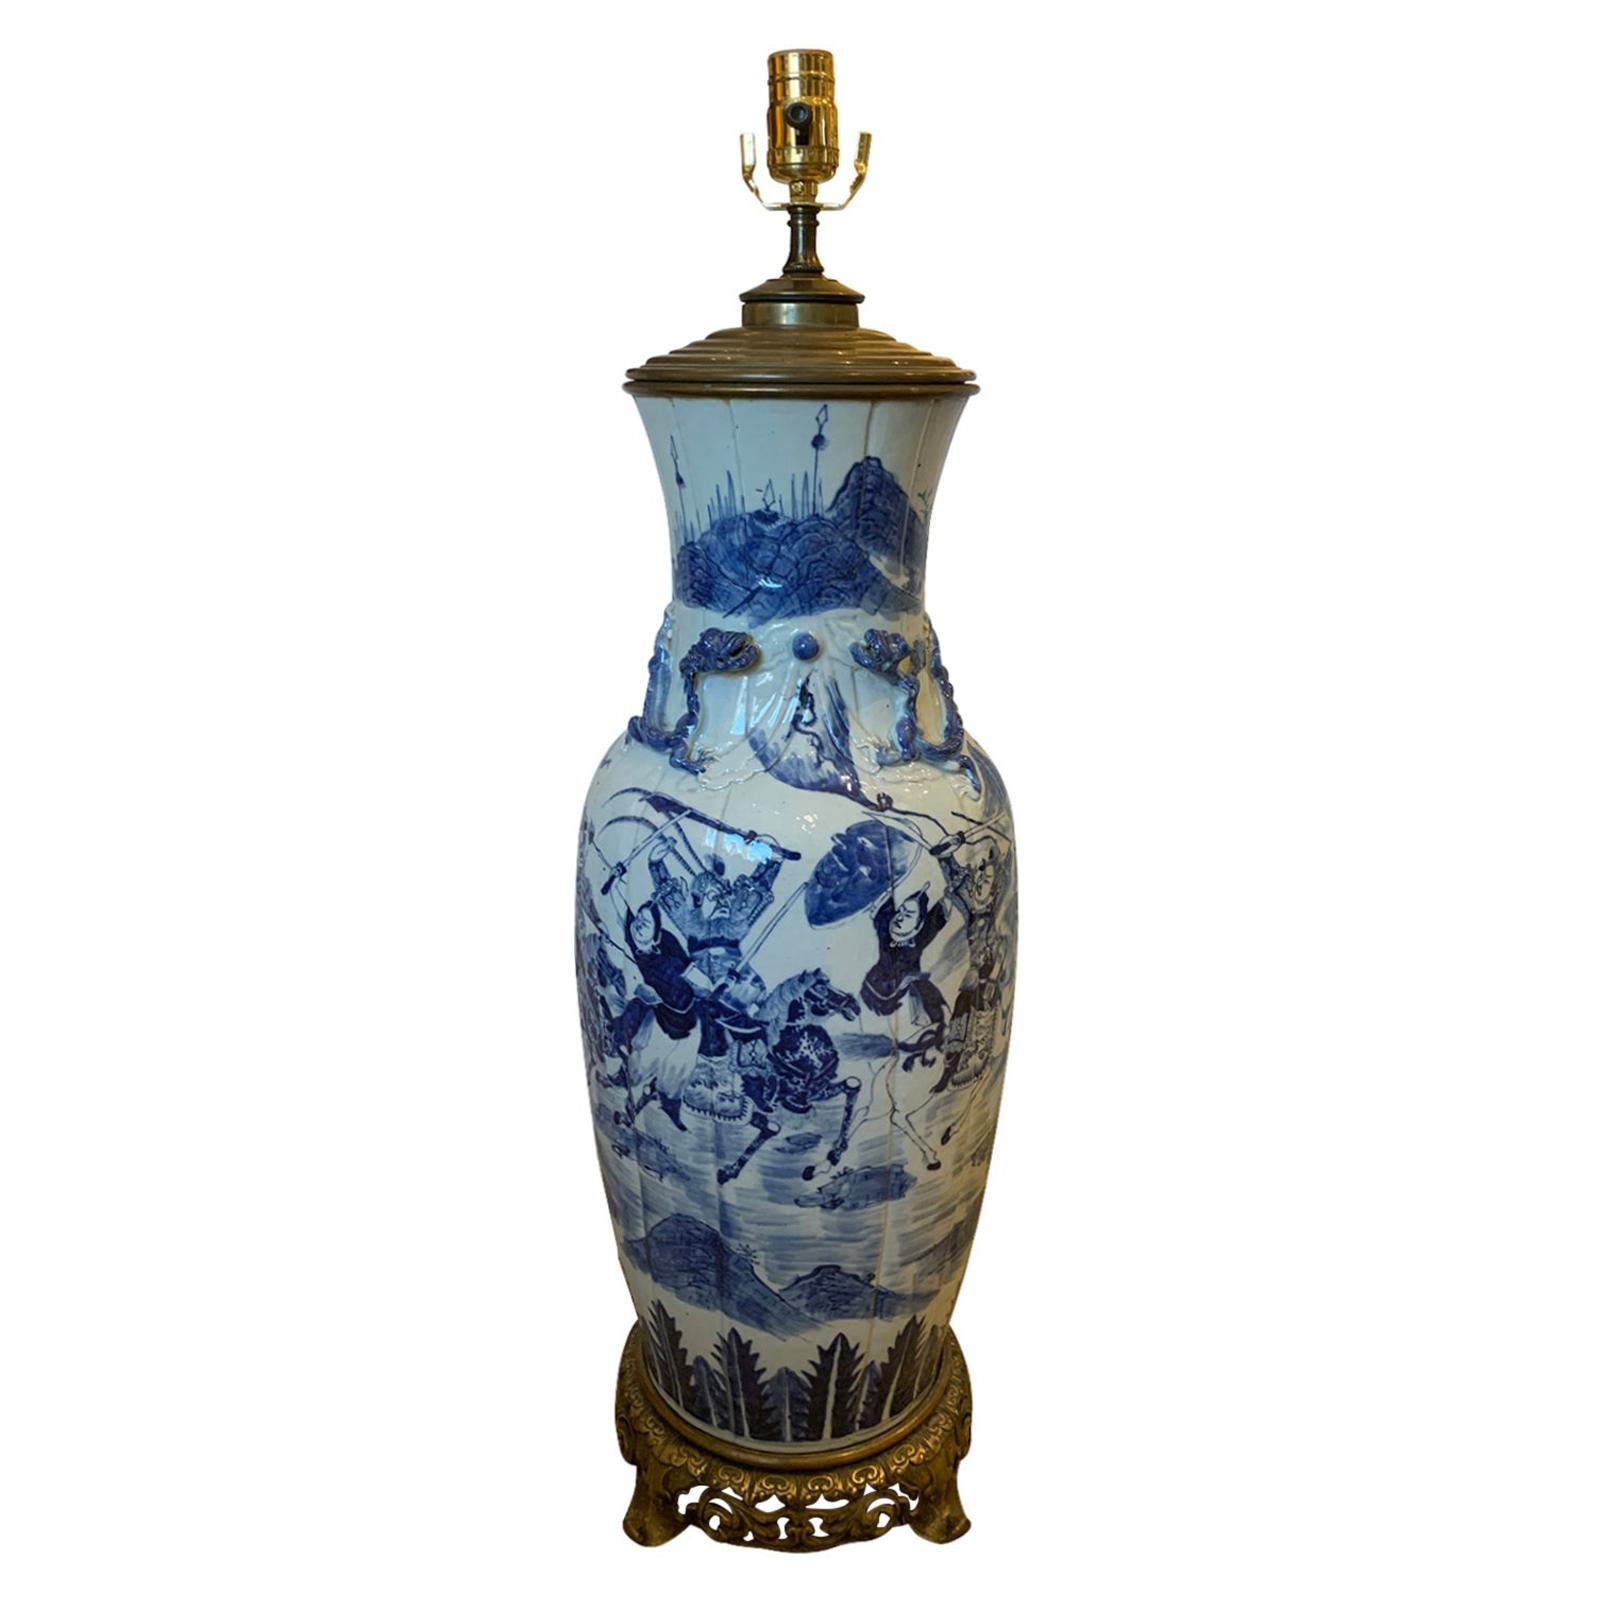 19th Century Chinese Blue and White Porcelain Lamp with Bronze Mounts